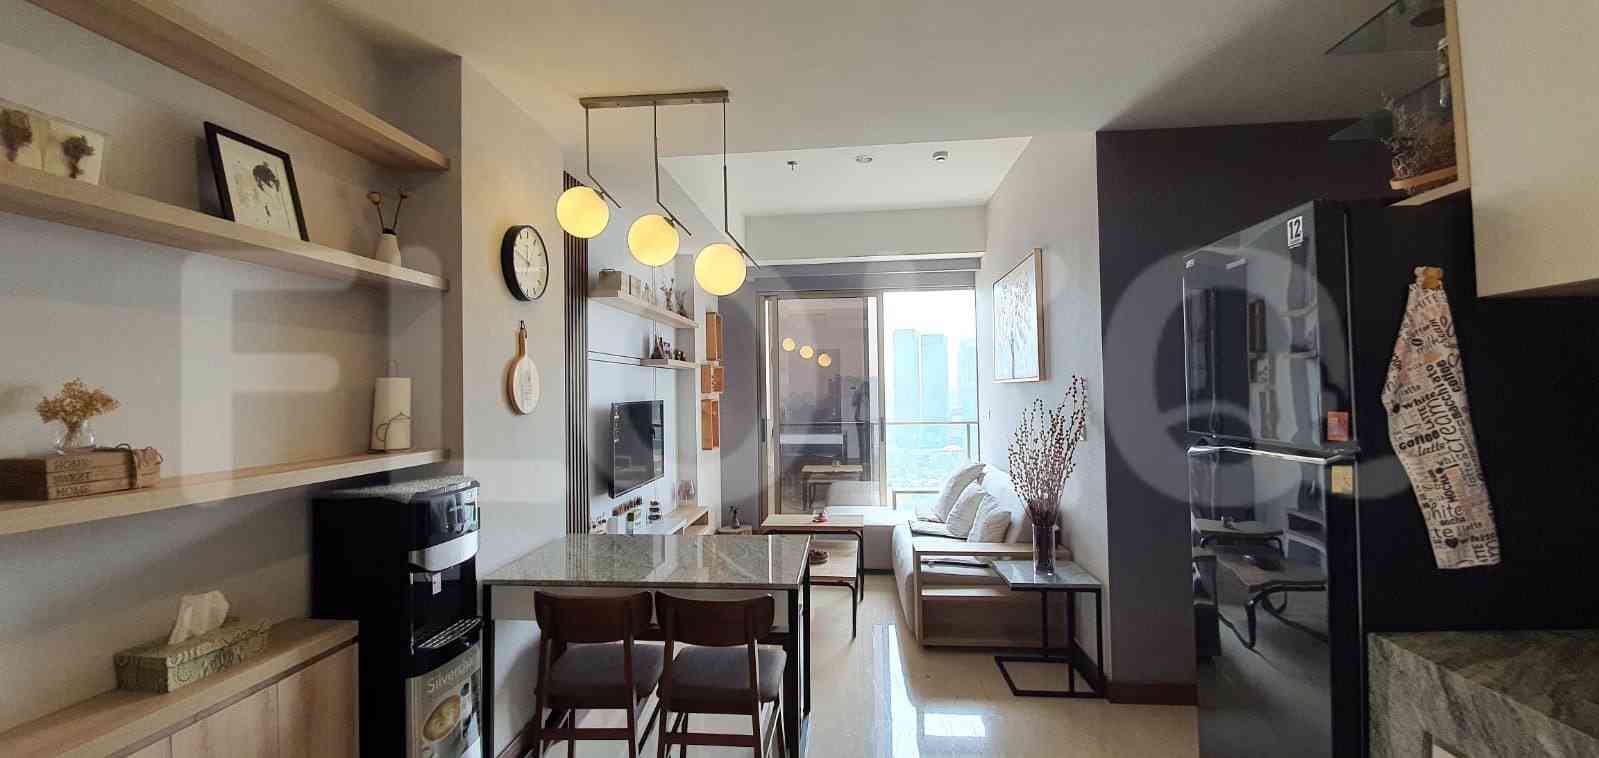 2 Bedroom on 13th Floor for Rent in Sudirman Hill Residences - ftaf11 2